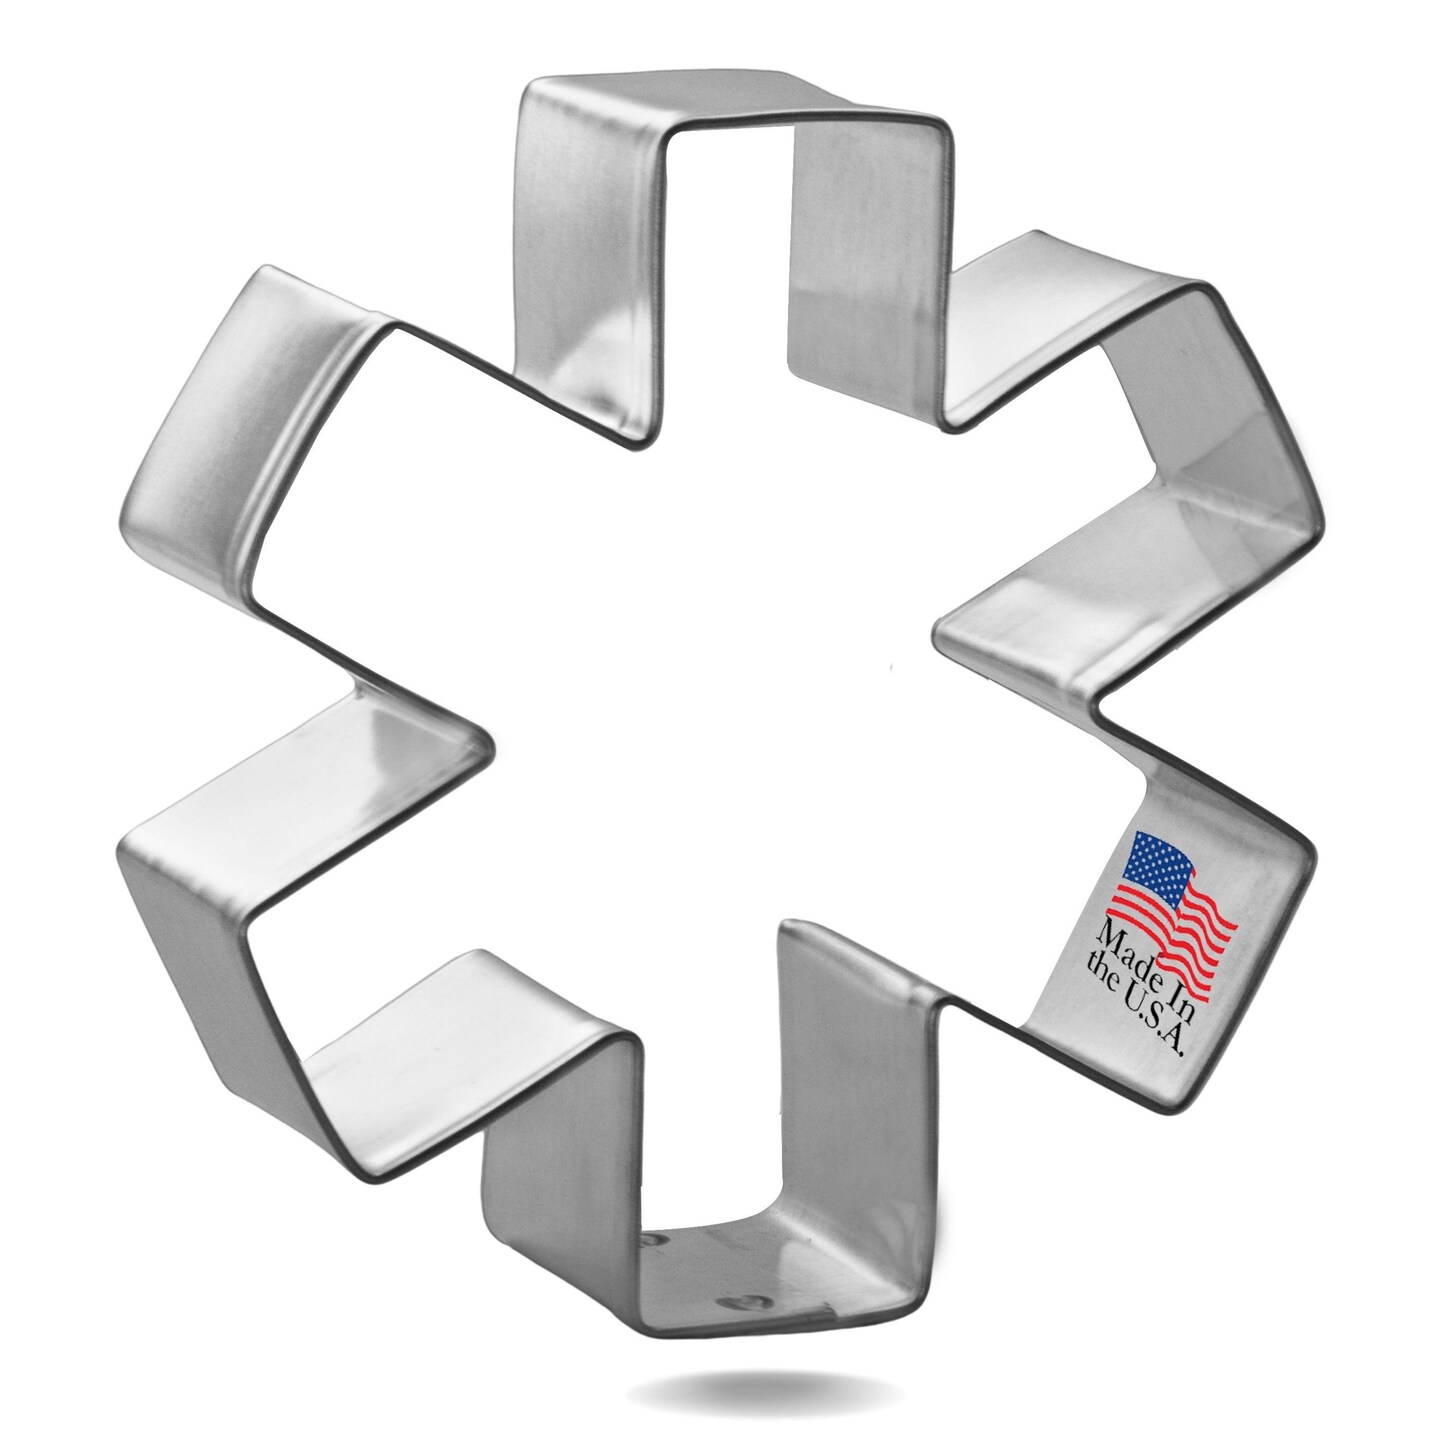 Medical Symbol Cookie Cutter 3 in, CookieCutter.com, Tin Plated Steel, Handmade in the USA